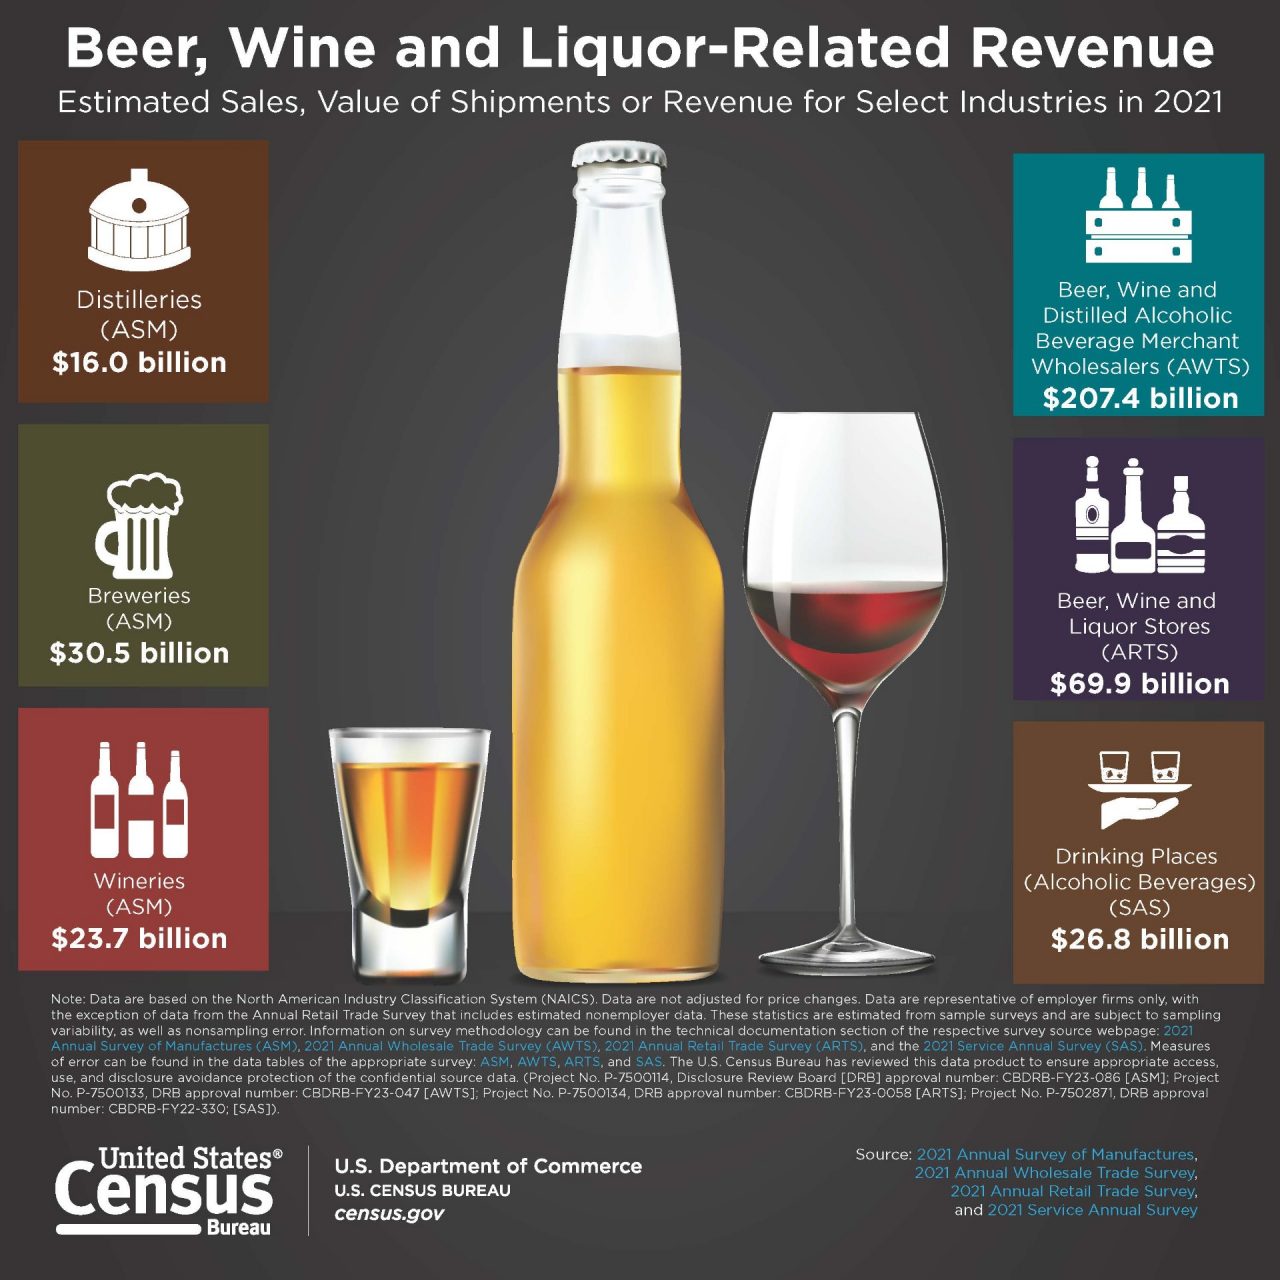 Beer, Wine and Liquor-Related Revenue